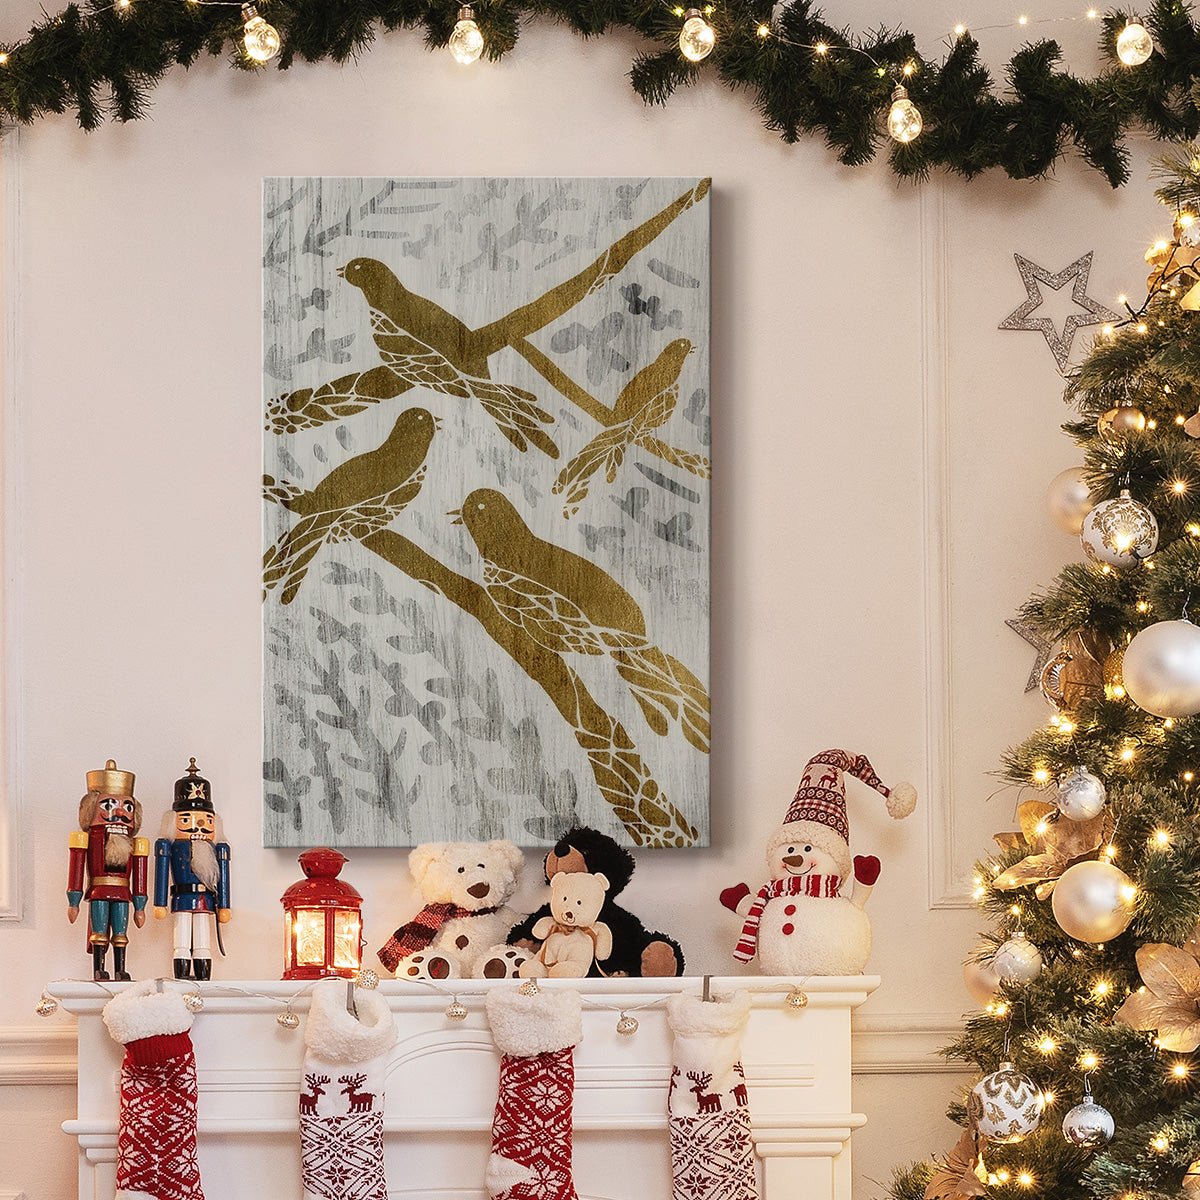 Four Calling Birds  - Gold Leaf Holiday - Gallery Wrapped Canvas